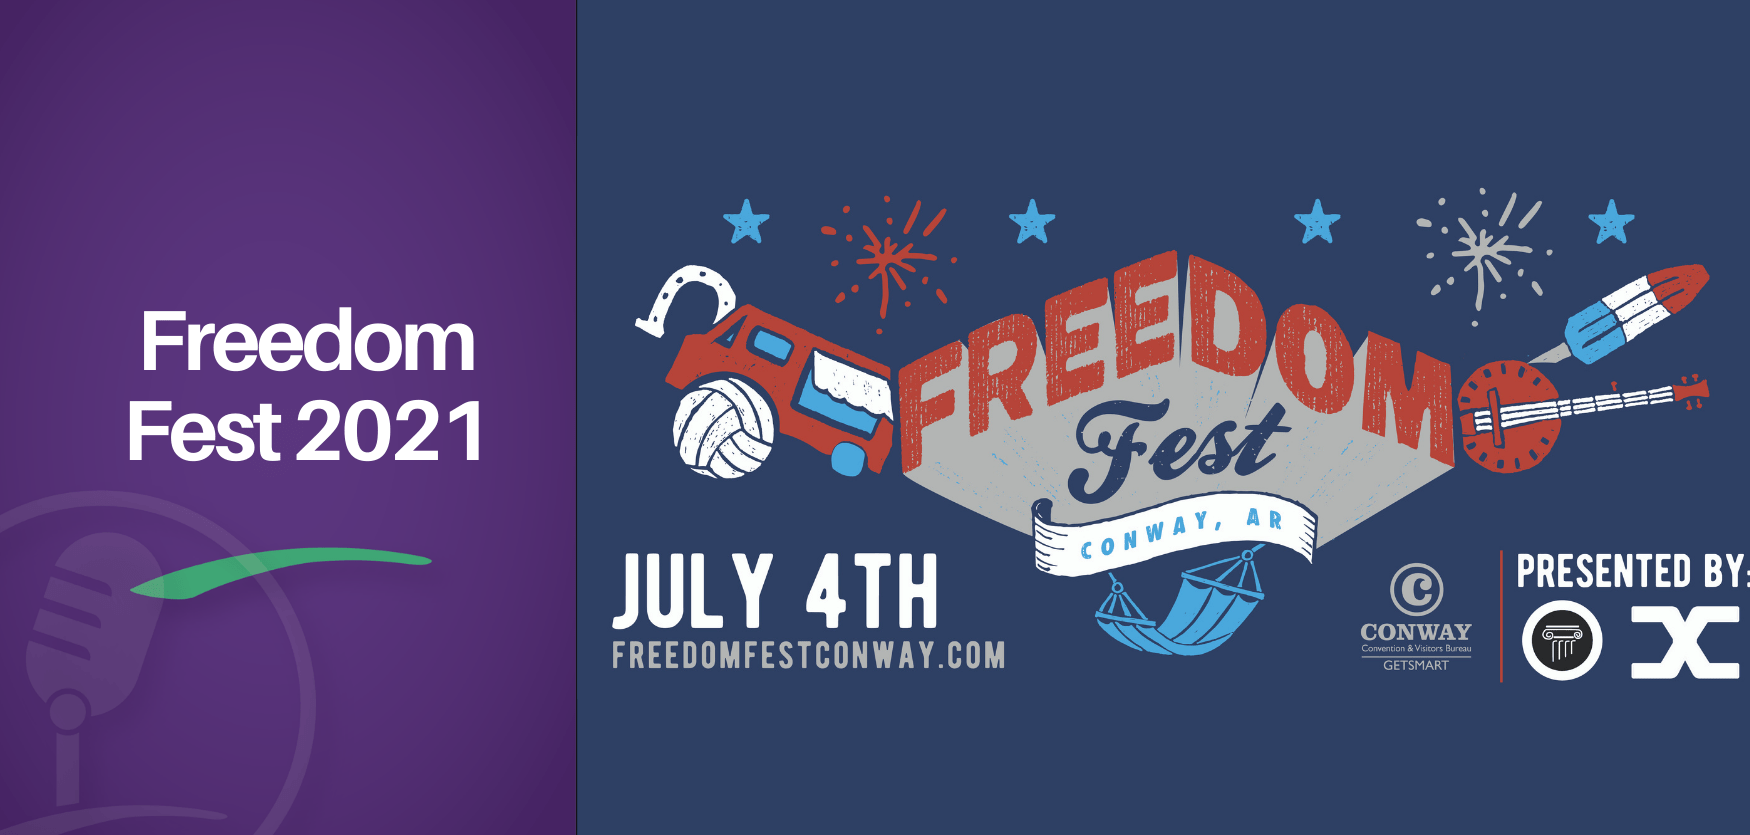 Conway's Freedom Fest returns to Beaverfork Lake on July 4th this year